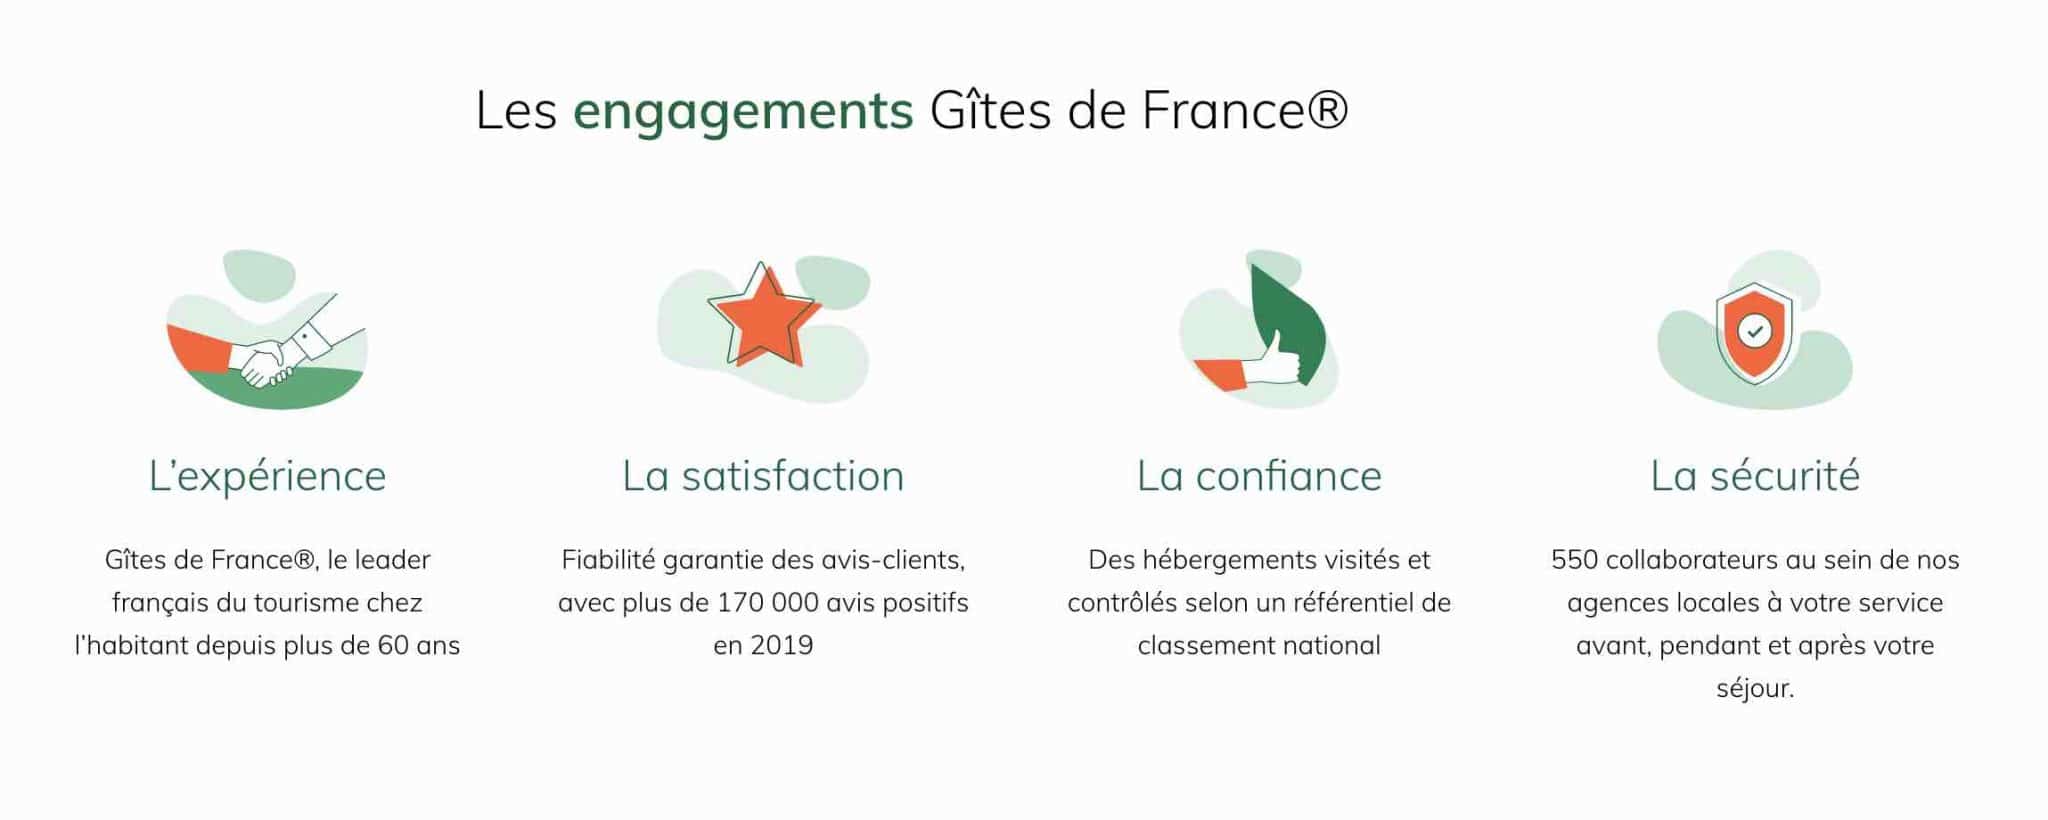 On the Gîtes de France home page, customer satisfaction is highlighted.
